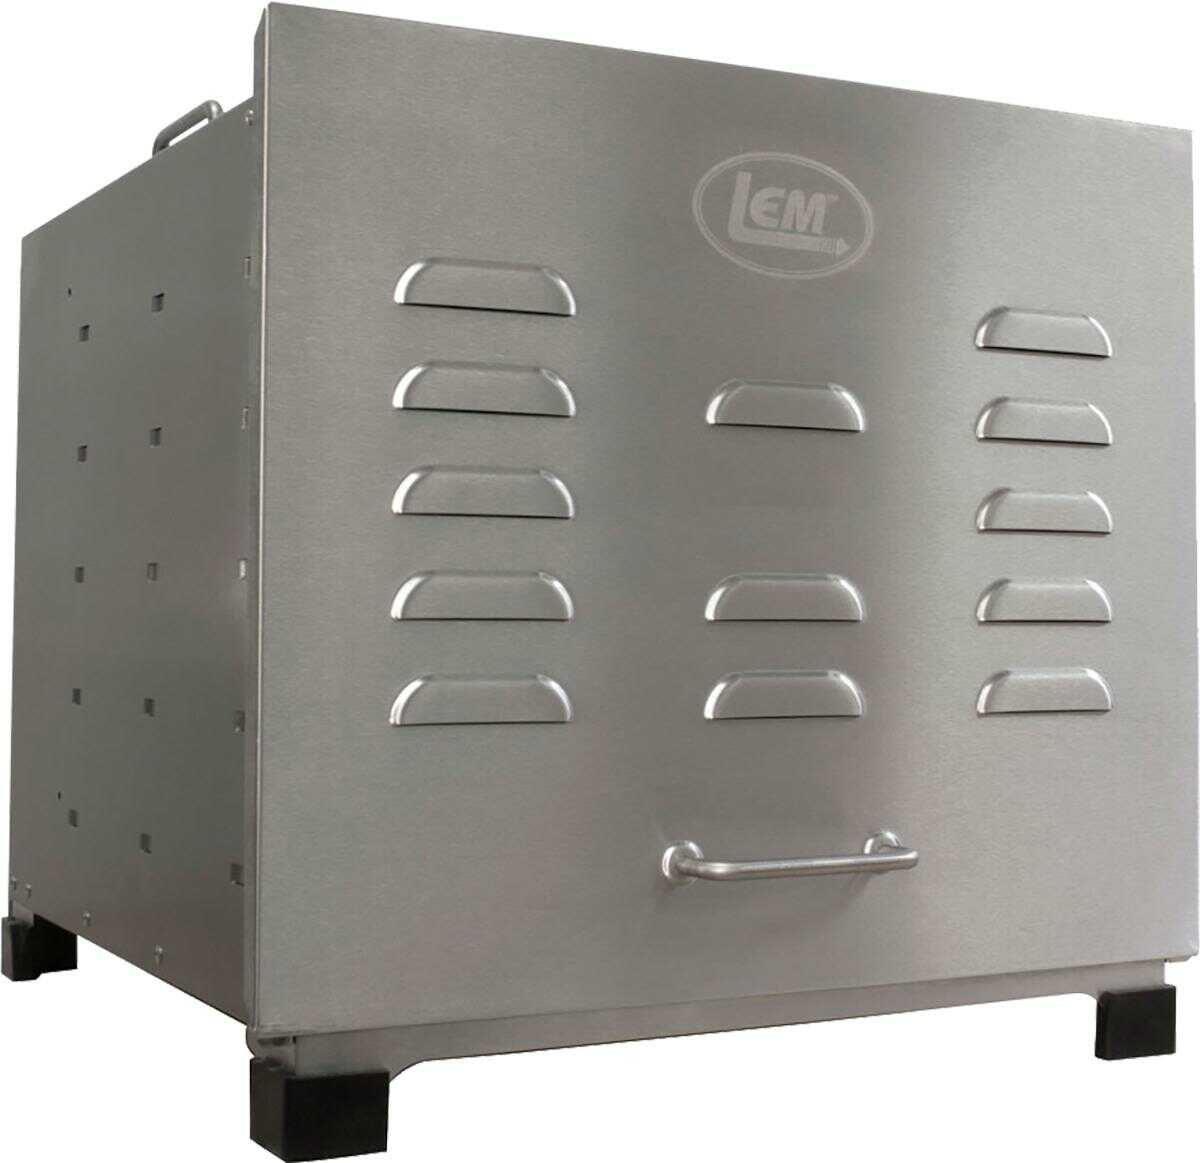 Lem Products Big Bite Stainless Steel Dehydrator w/12 hr Timer